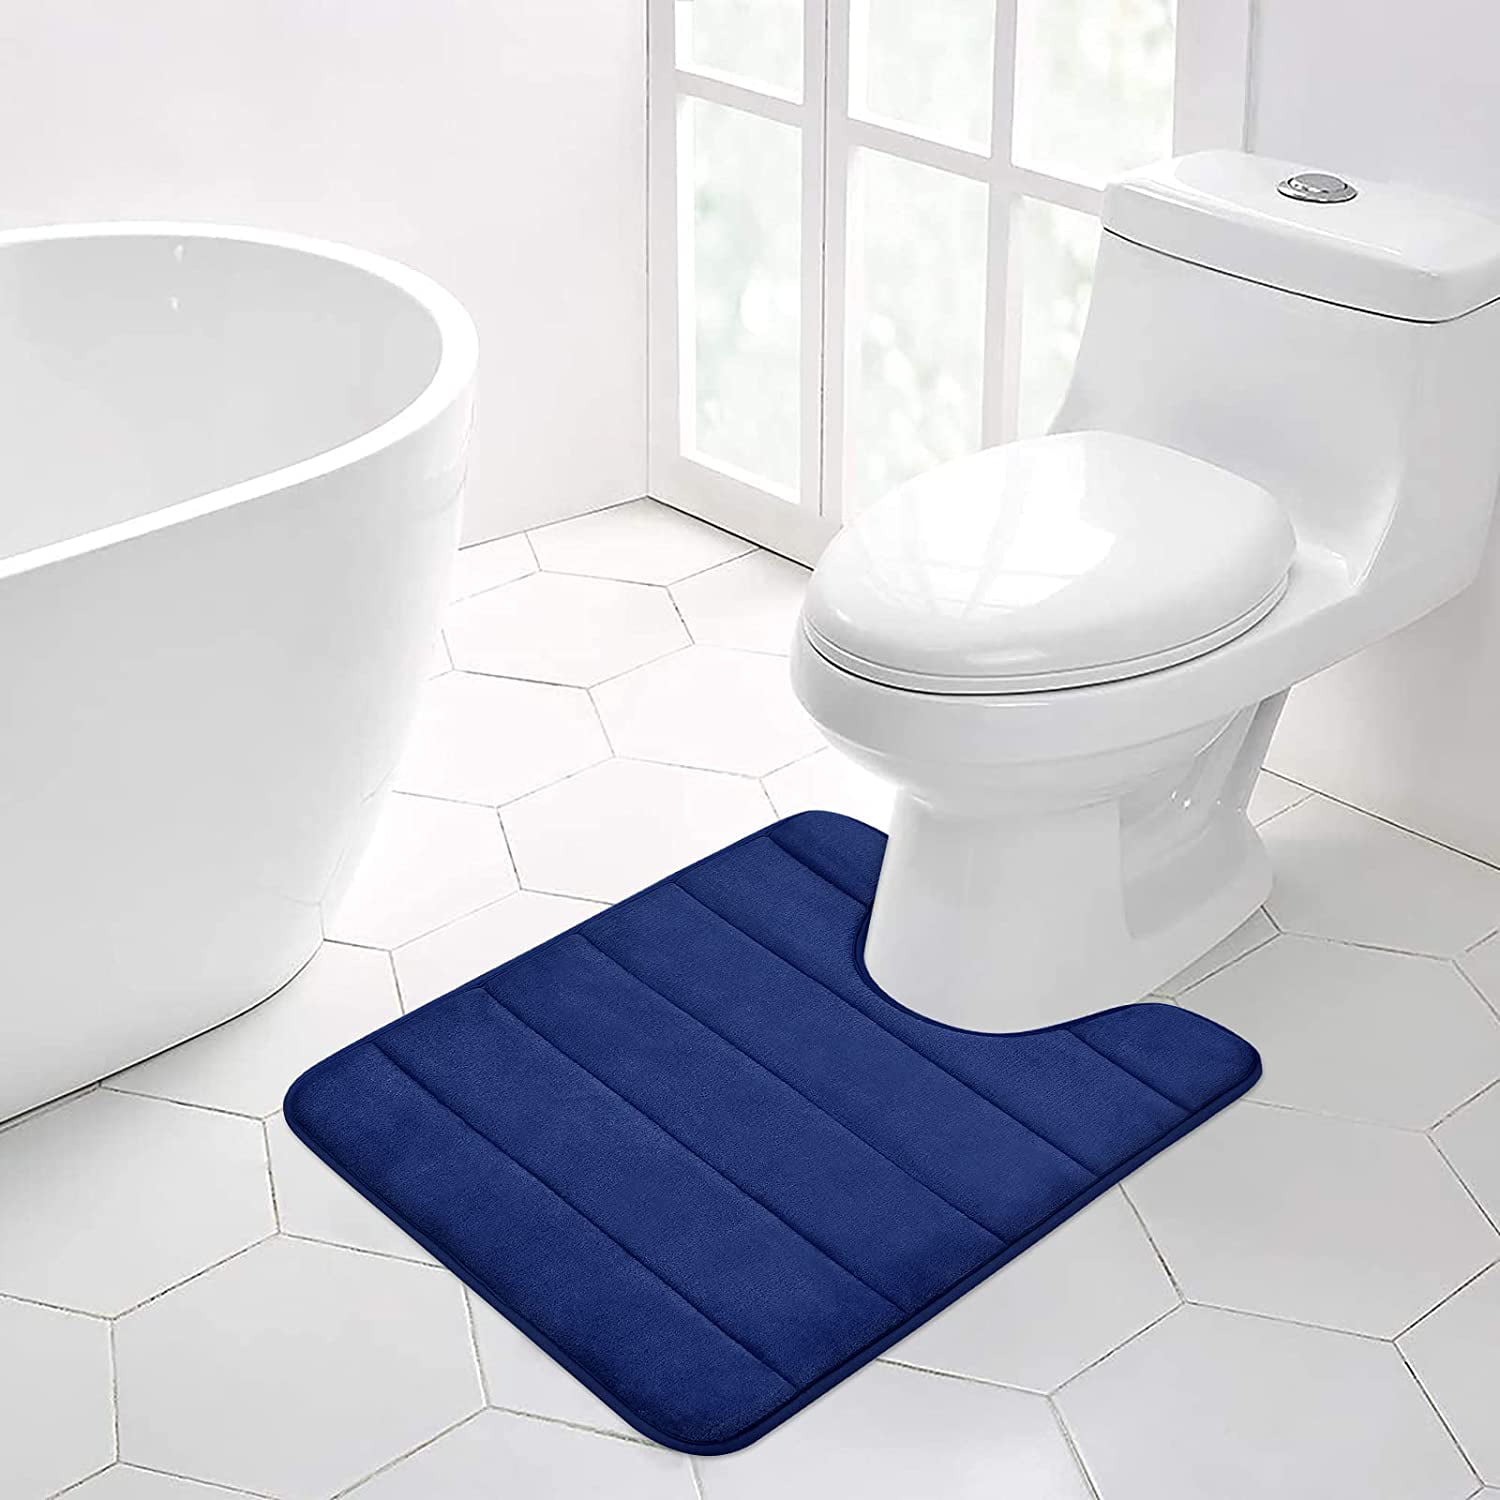 Details about   Bathroom Non-slip Rugs 3 Pcs Toilet Mats Anti Slip Love Hear Red Rose Printed 